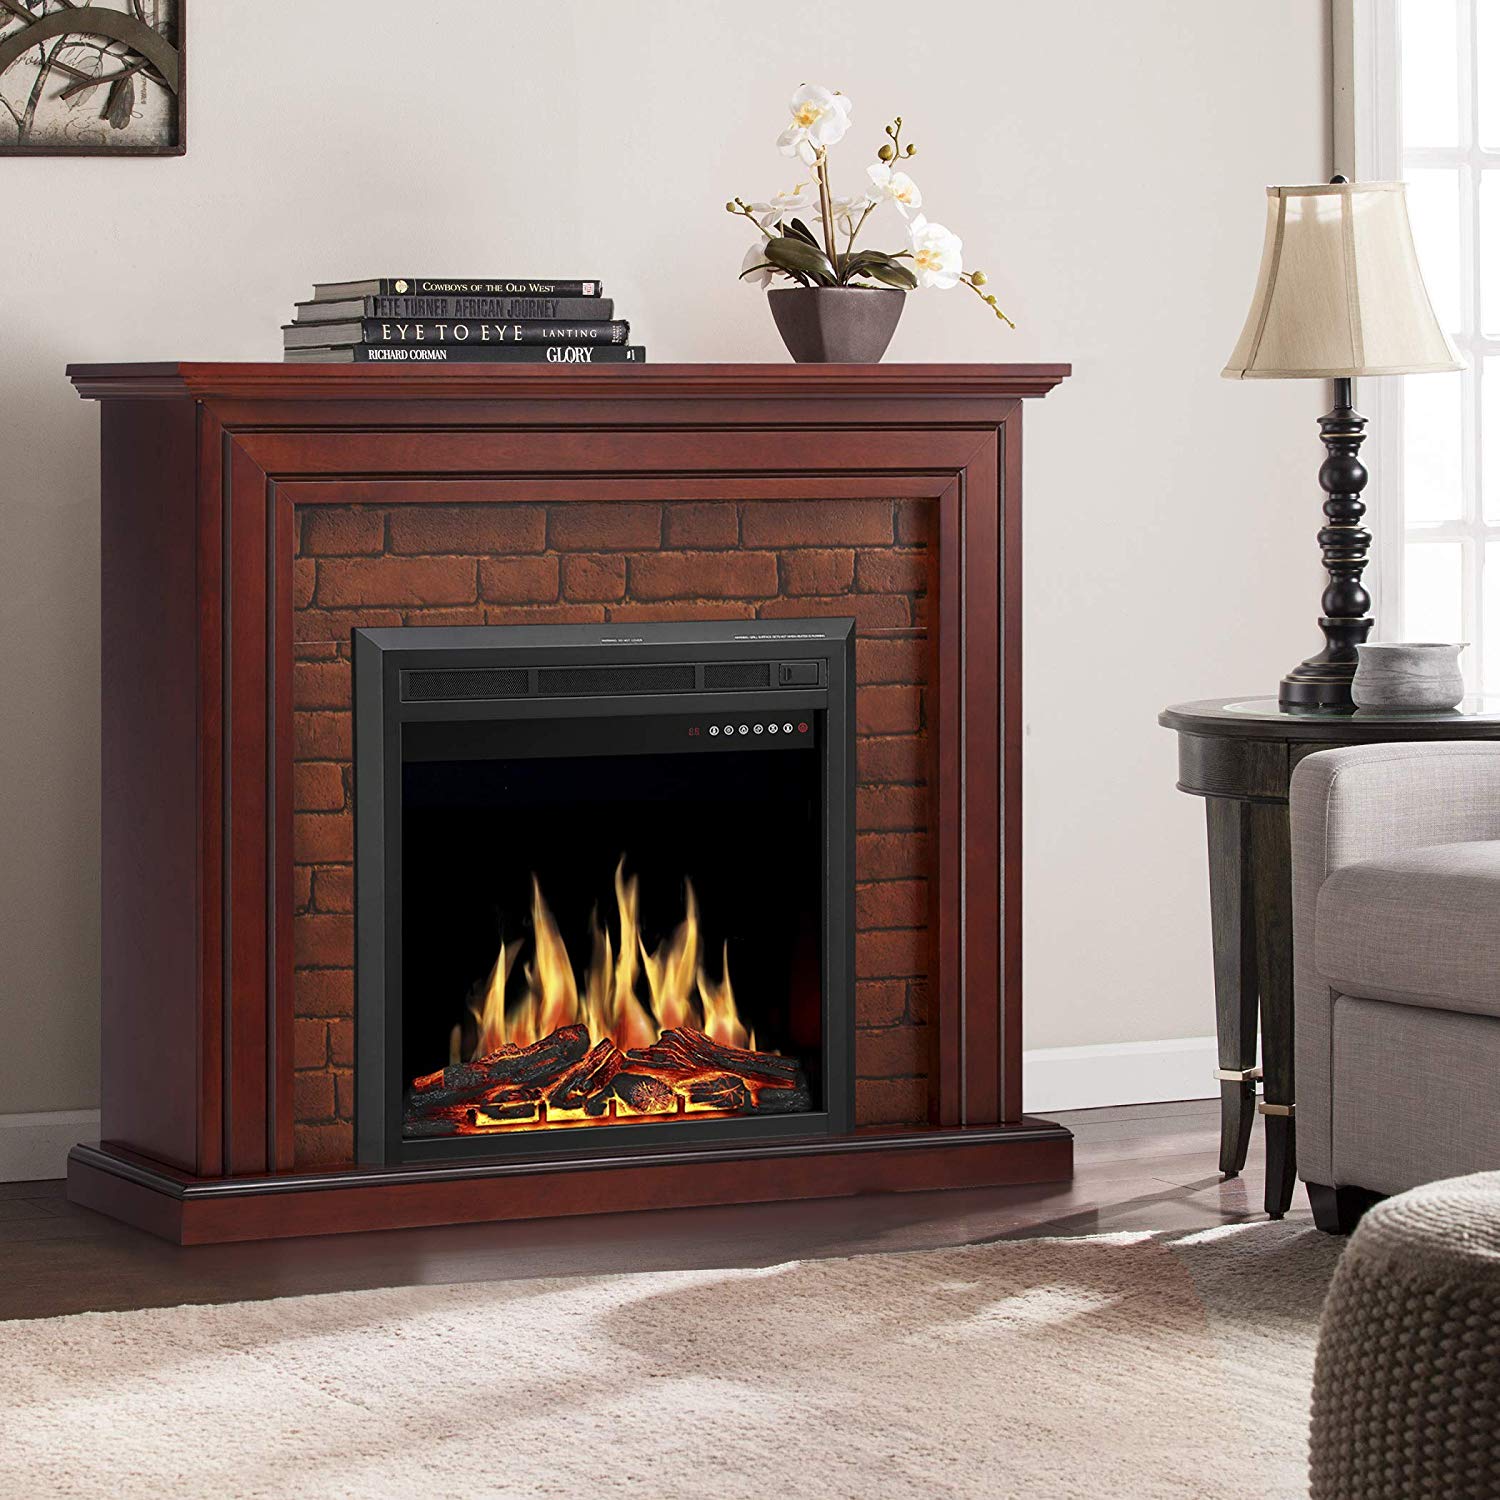 62 Inch Electric Fireplace Awesome Jamfly Electric Fireplace Mantel Package Traditional Brick Wall Design Heater with Remote Control and Led touch Screen Home Accent Furnishings